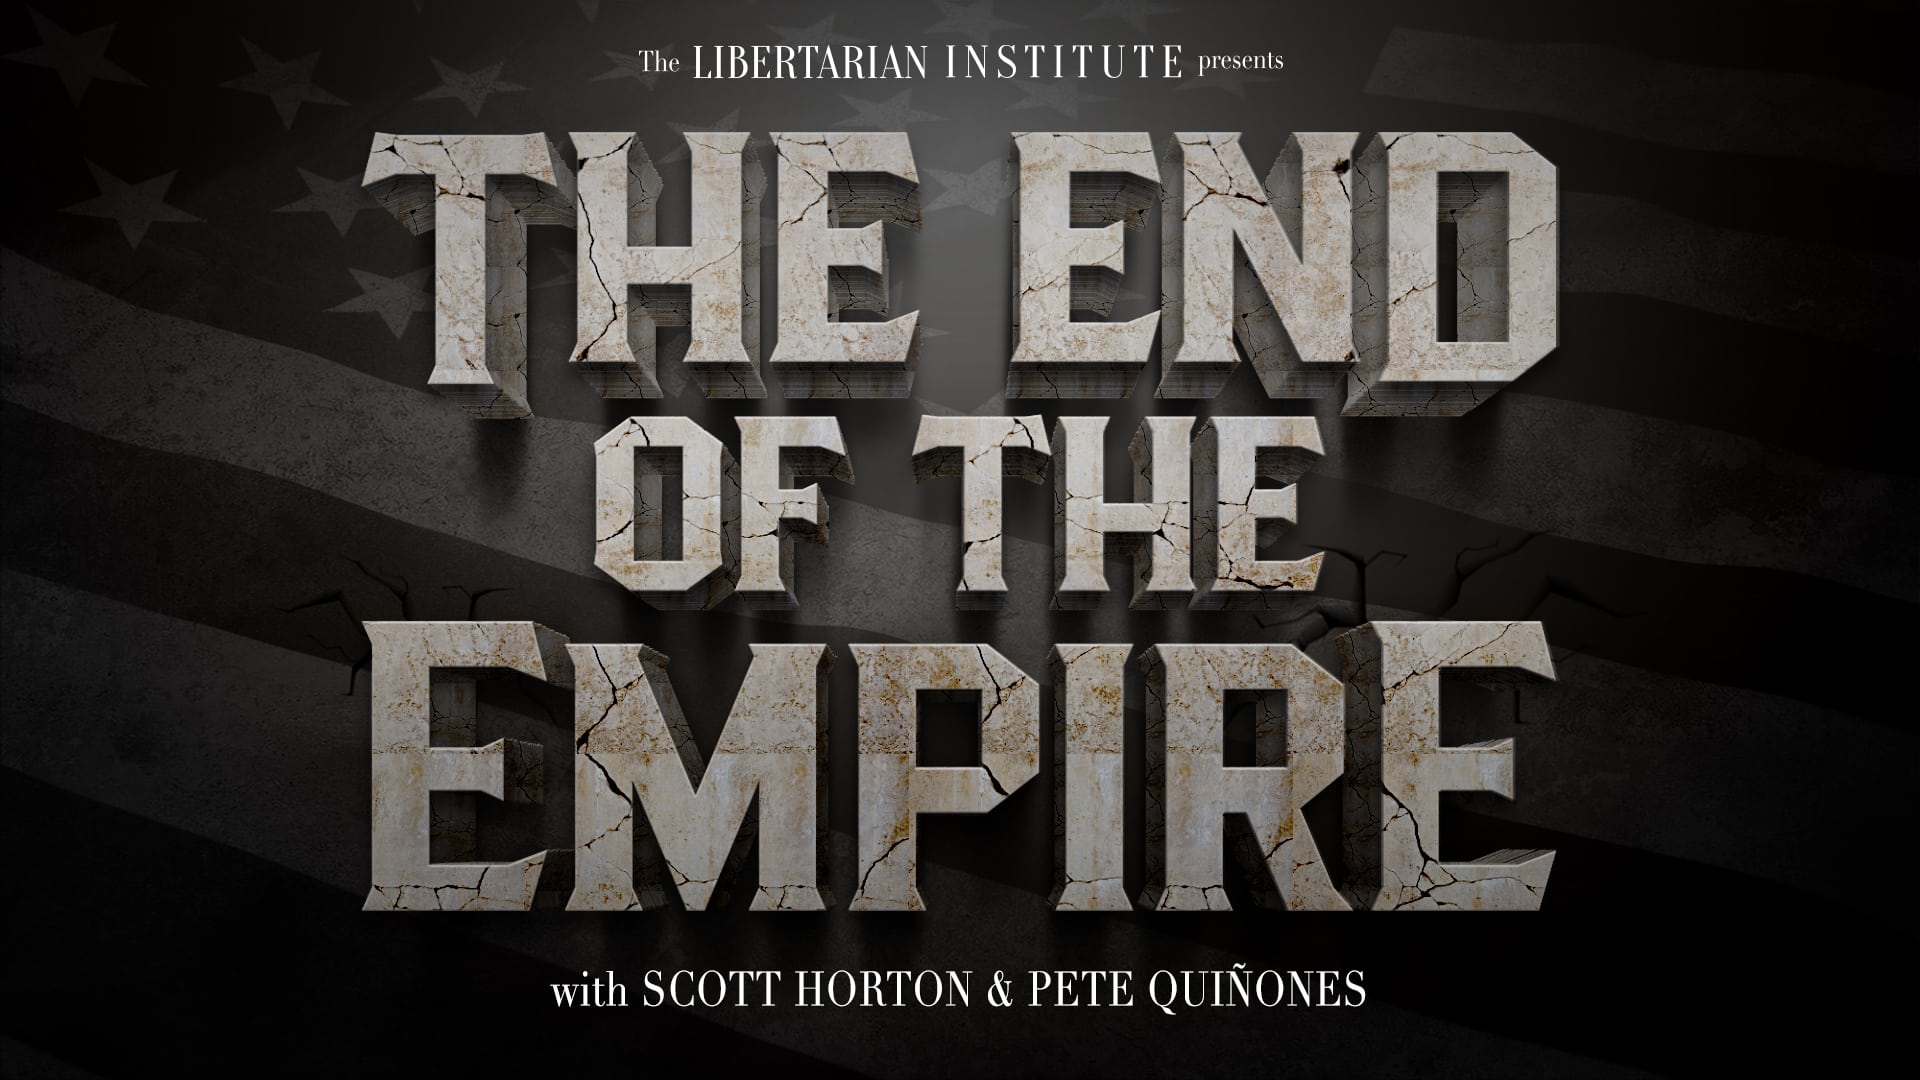 Episode 638: The End of the Empire Ep. 2 w/ Pete and Scott Horton